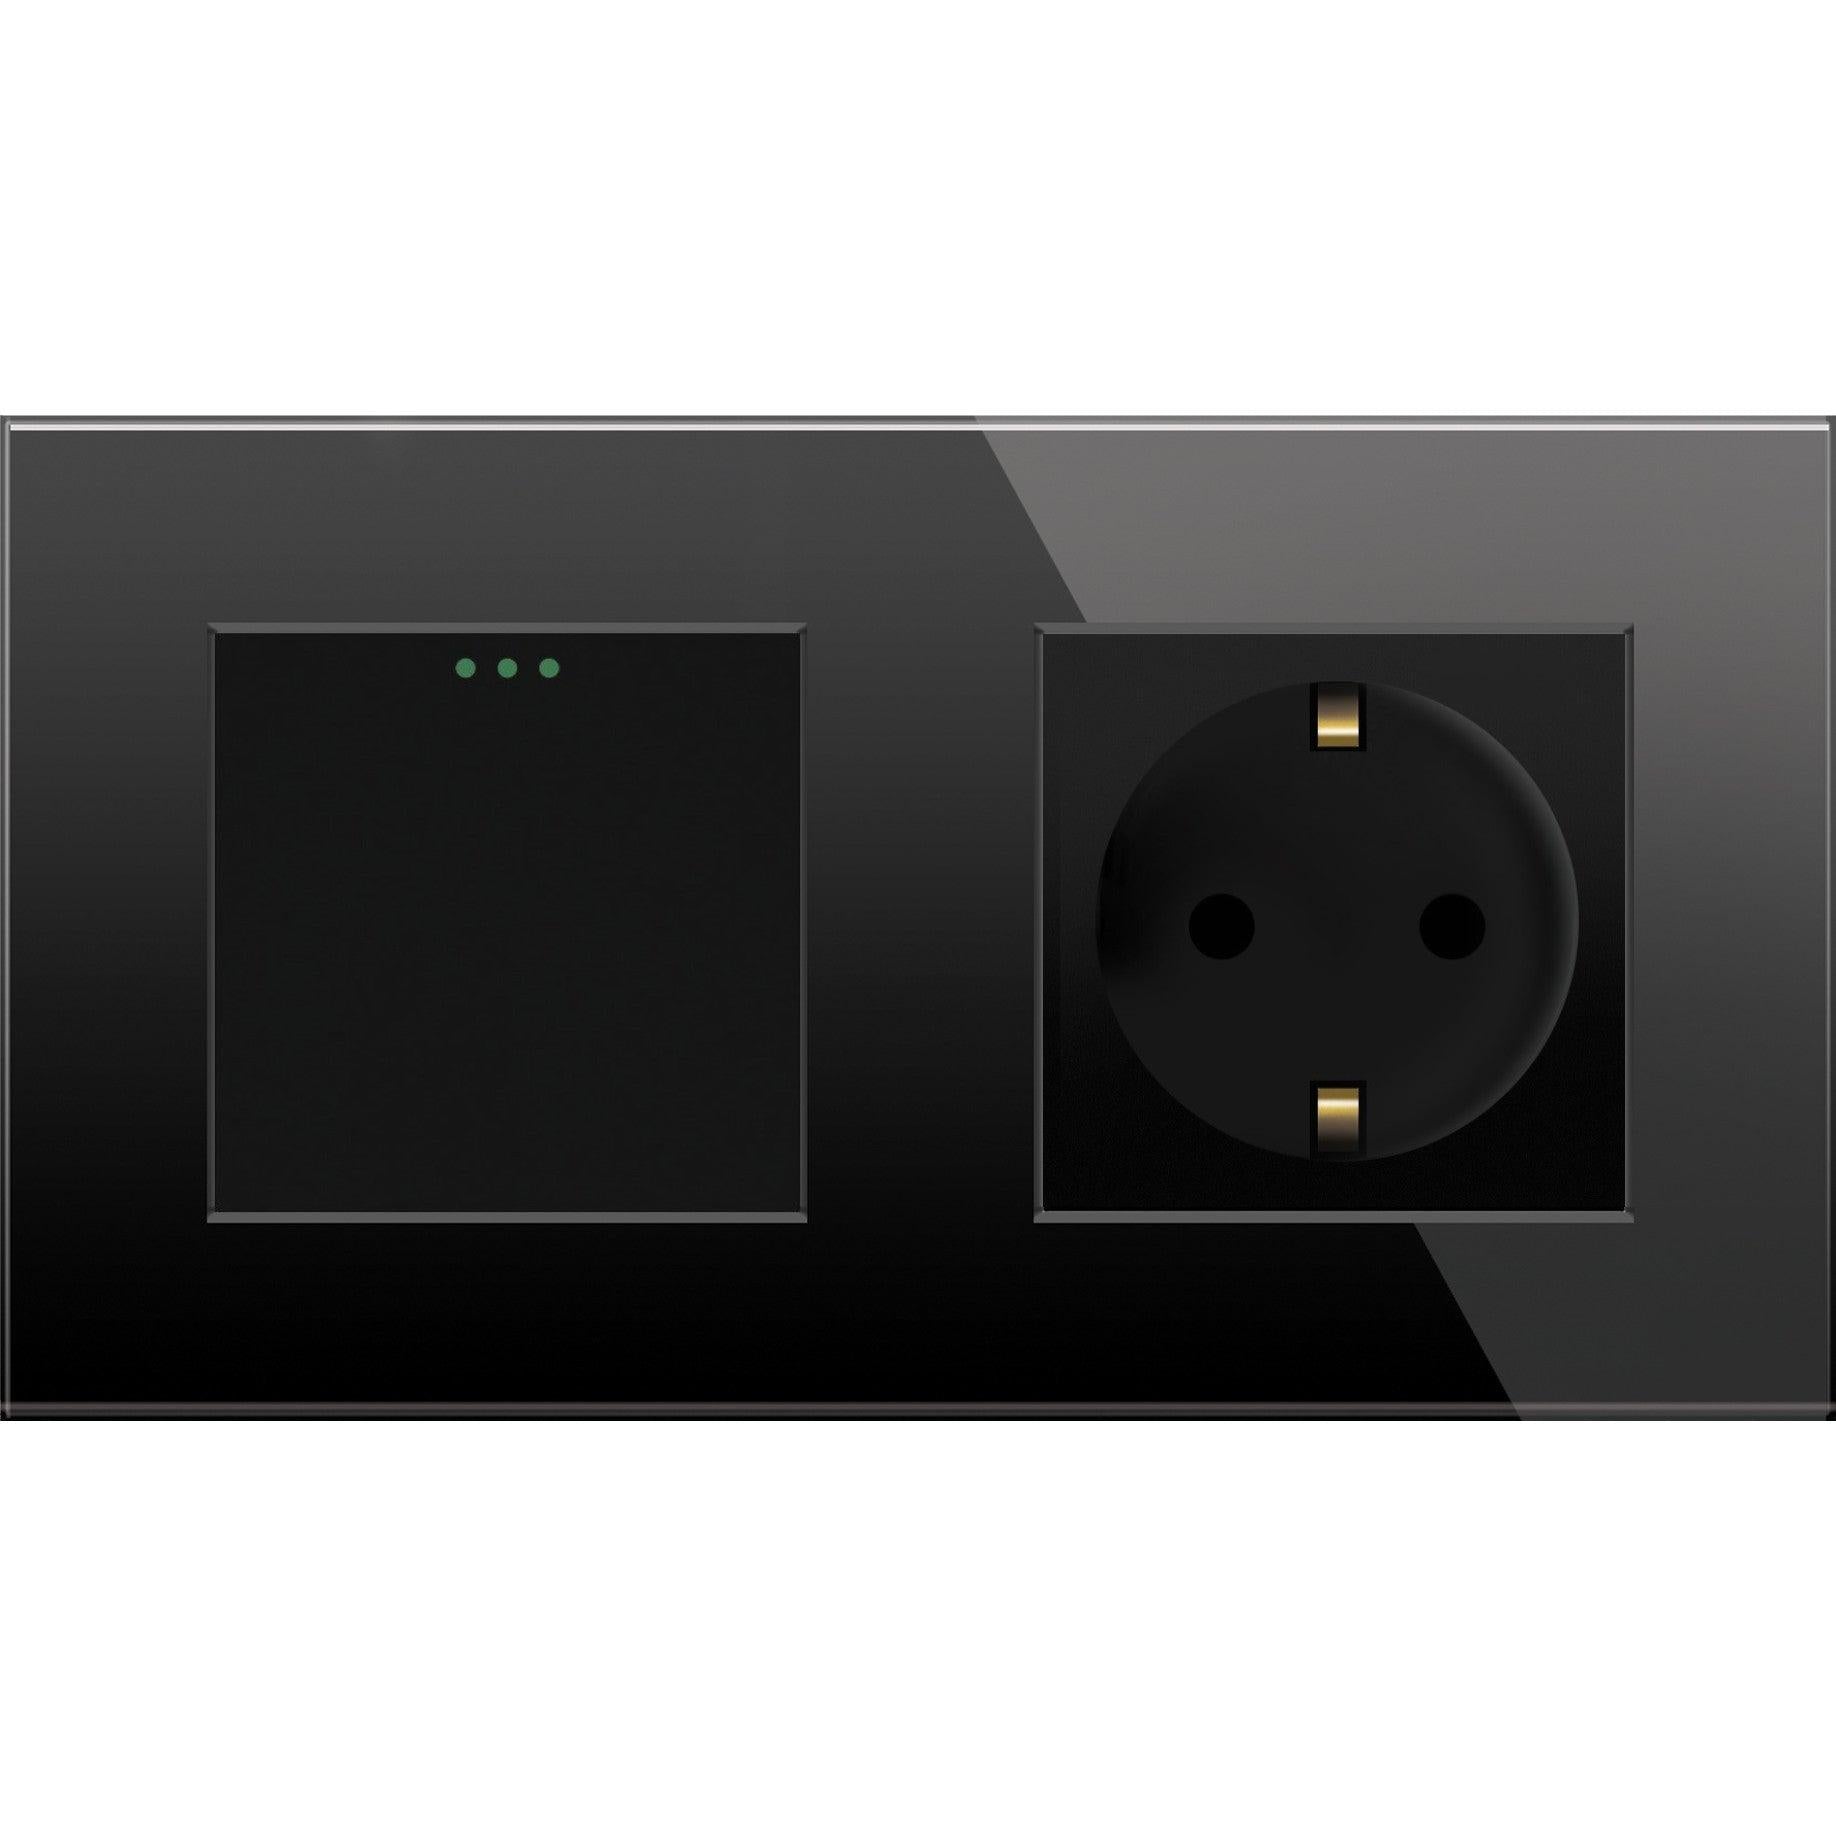 One gang mechanical switch with one socket (black, glass) - Springswitches